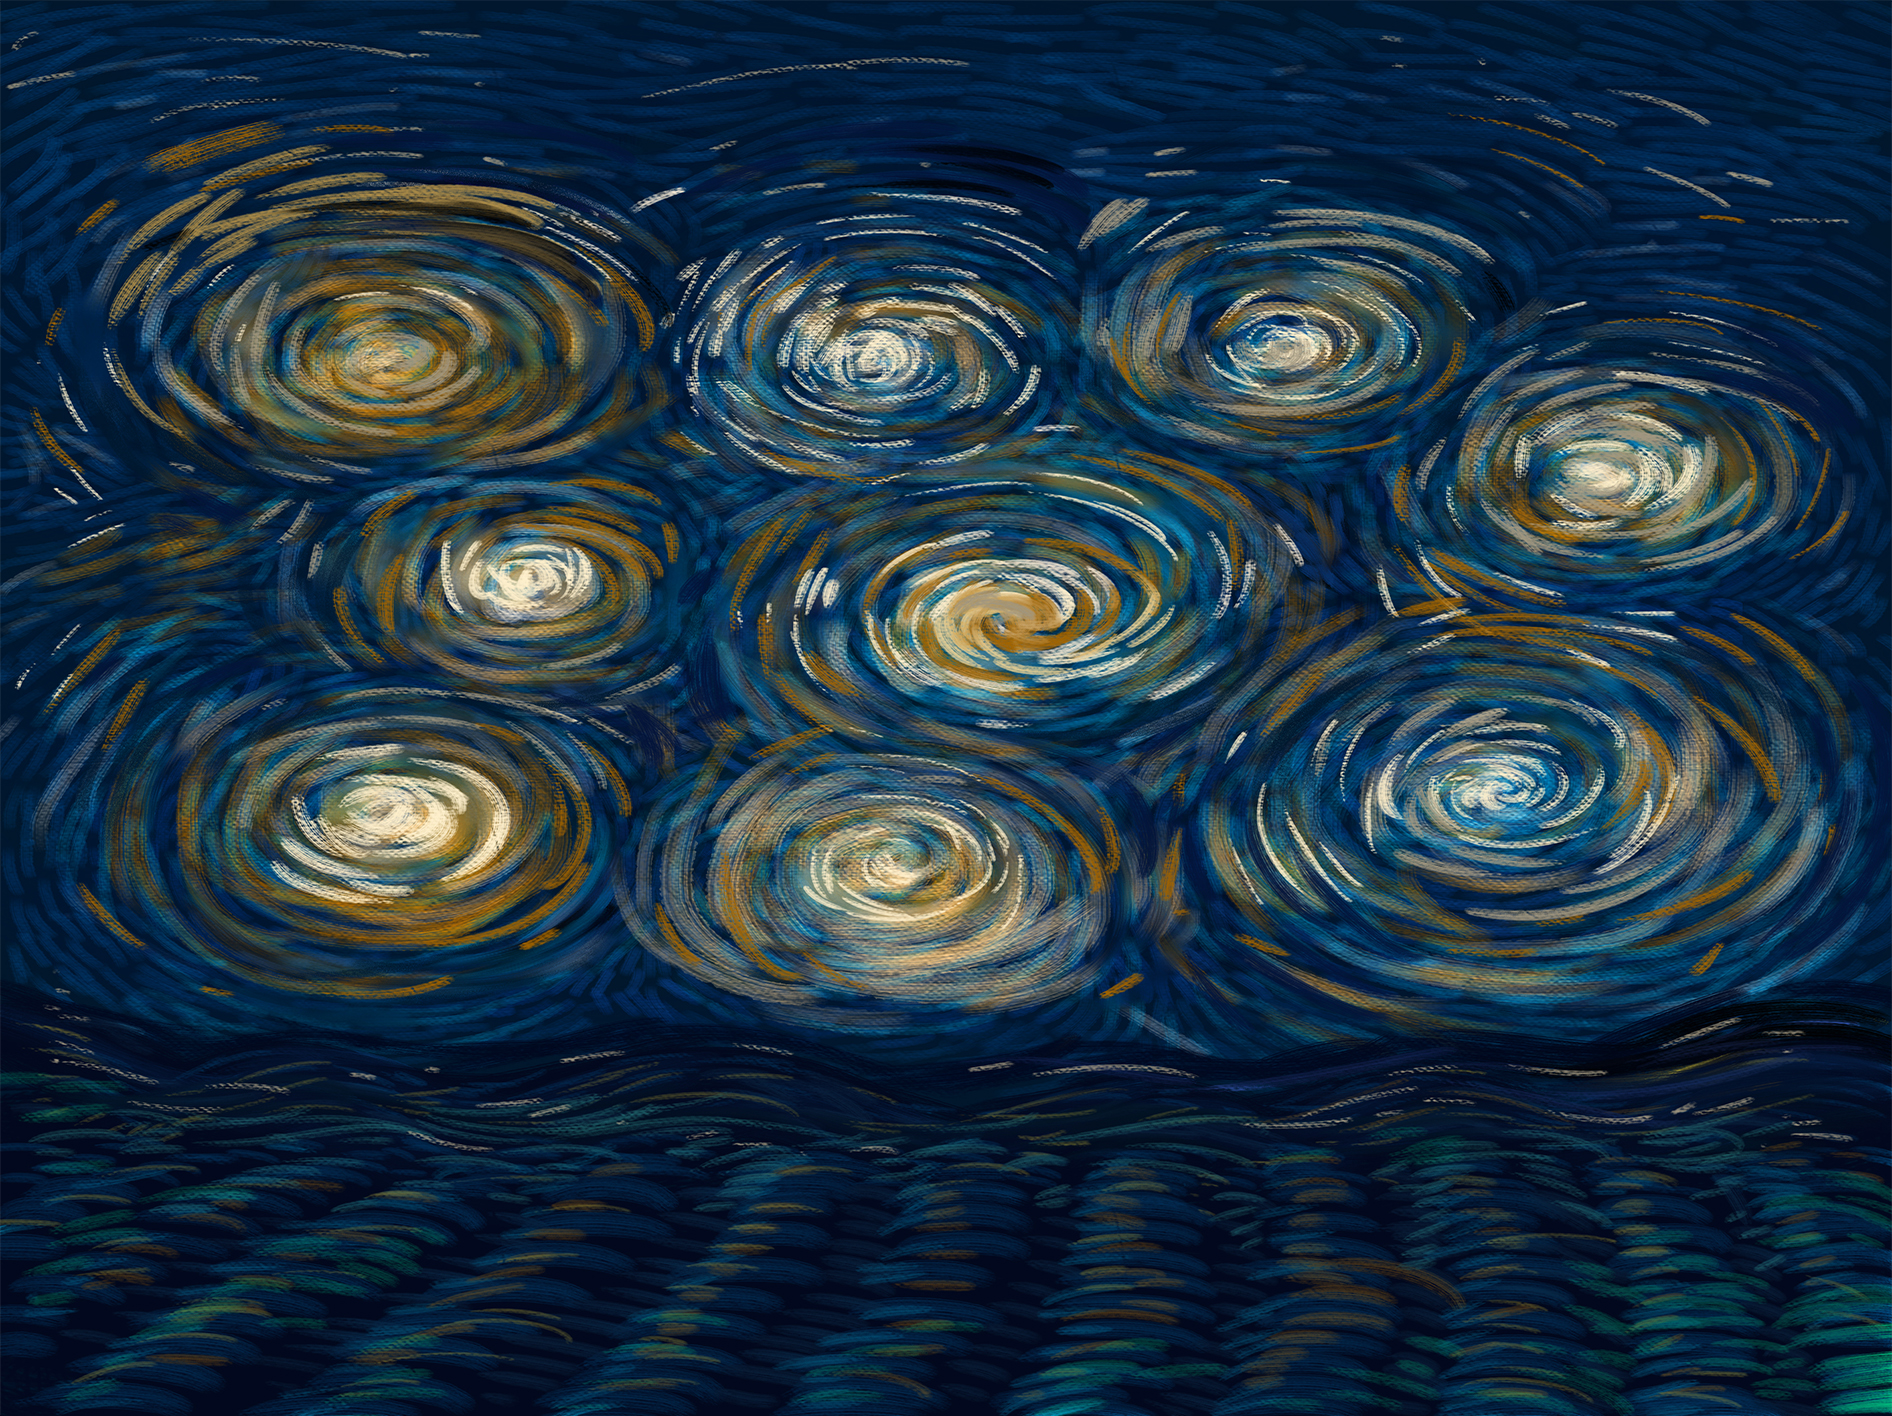 nine spirals of yellow and white over a dark blue impressionist background, with darker lines of waves along the bottom of the image